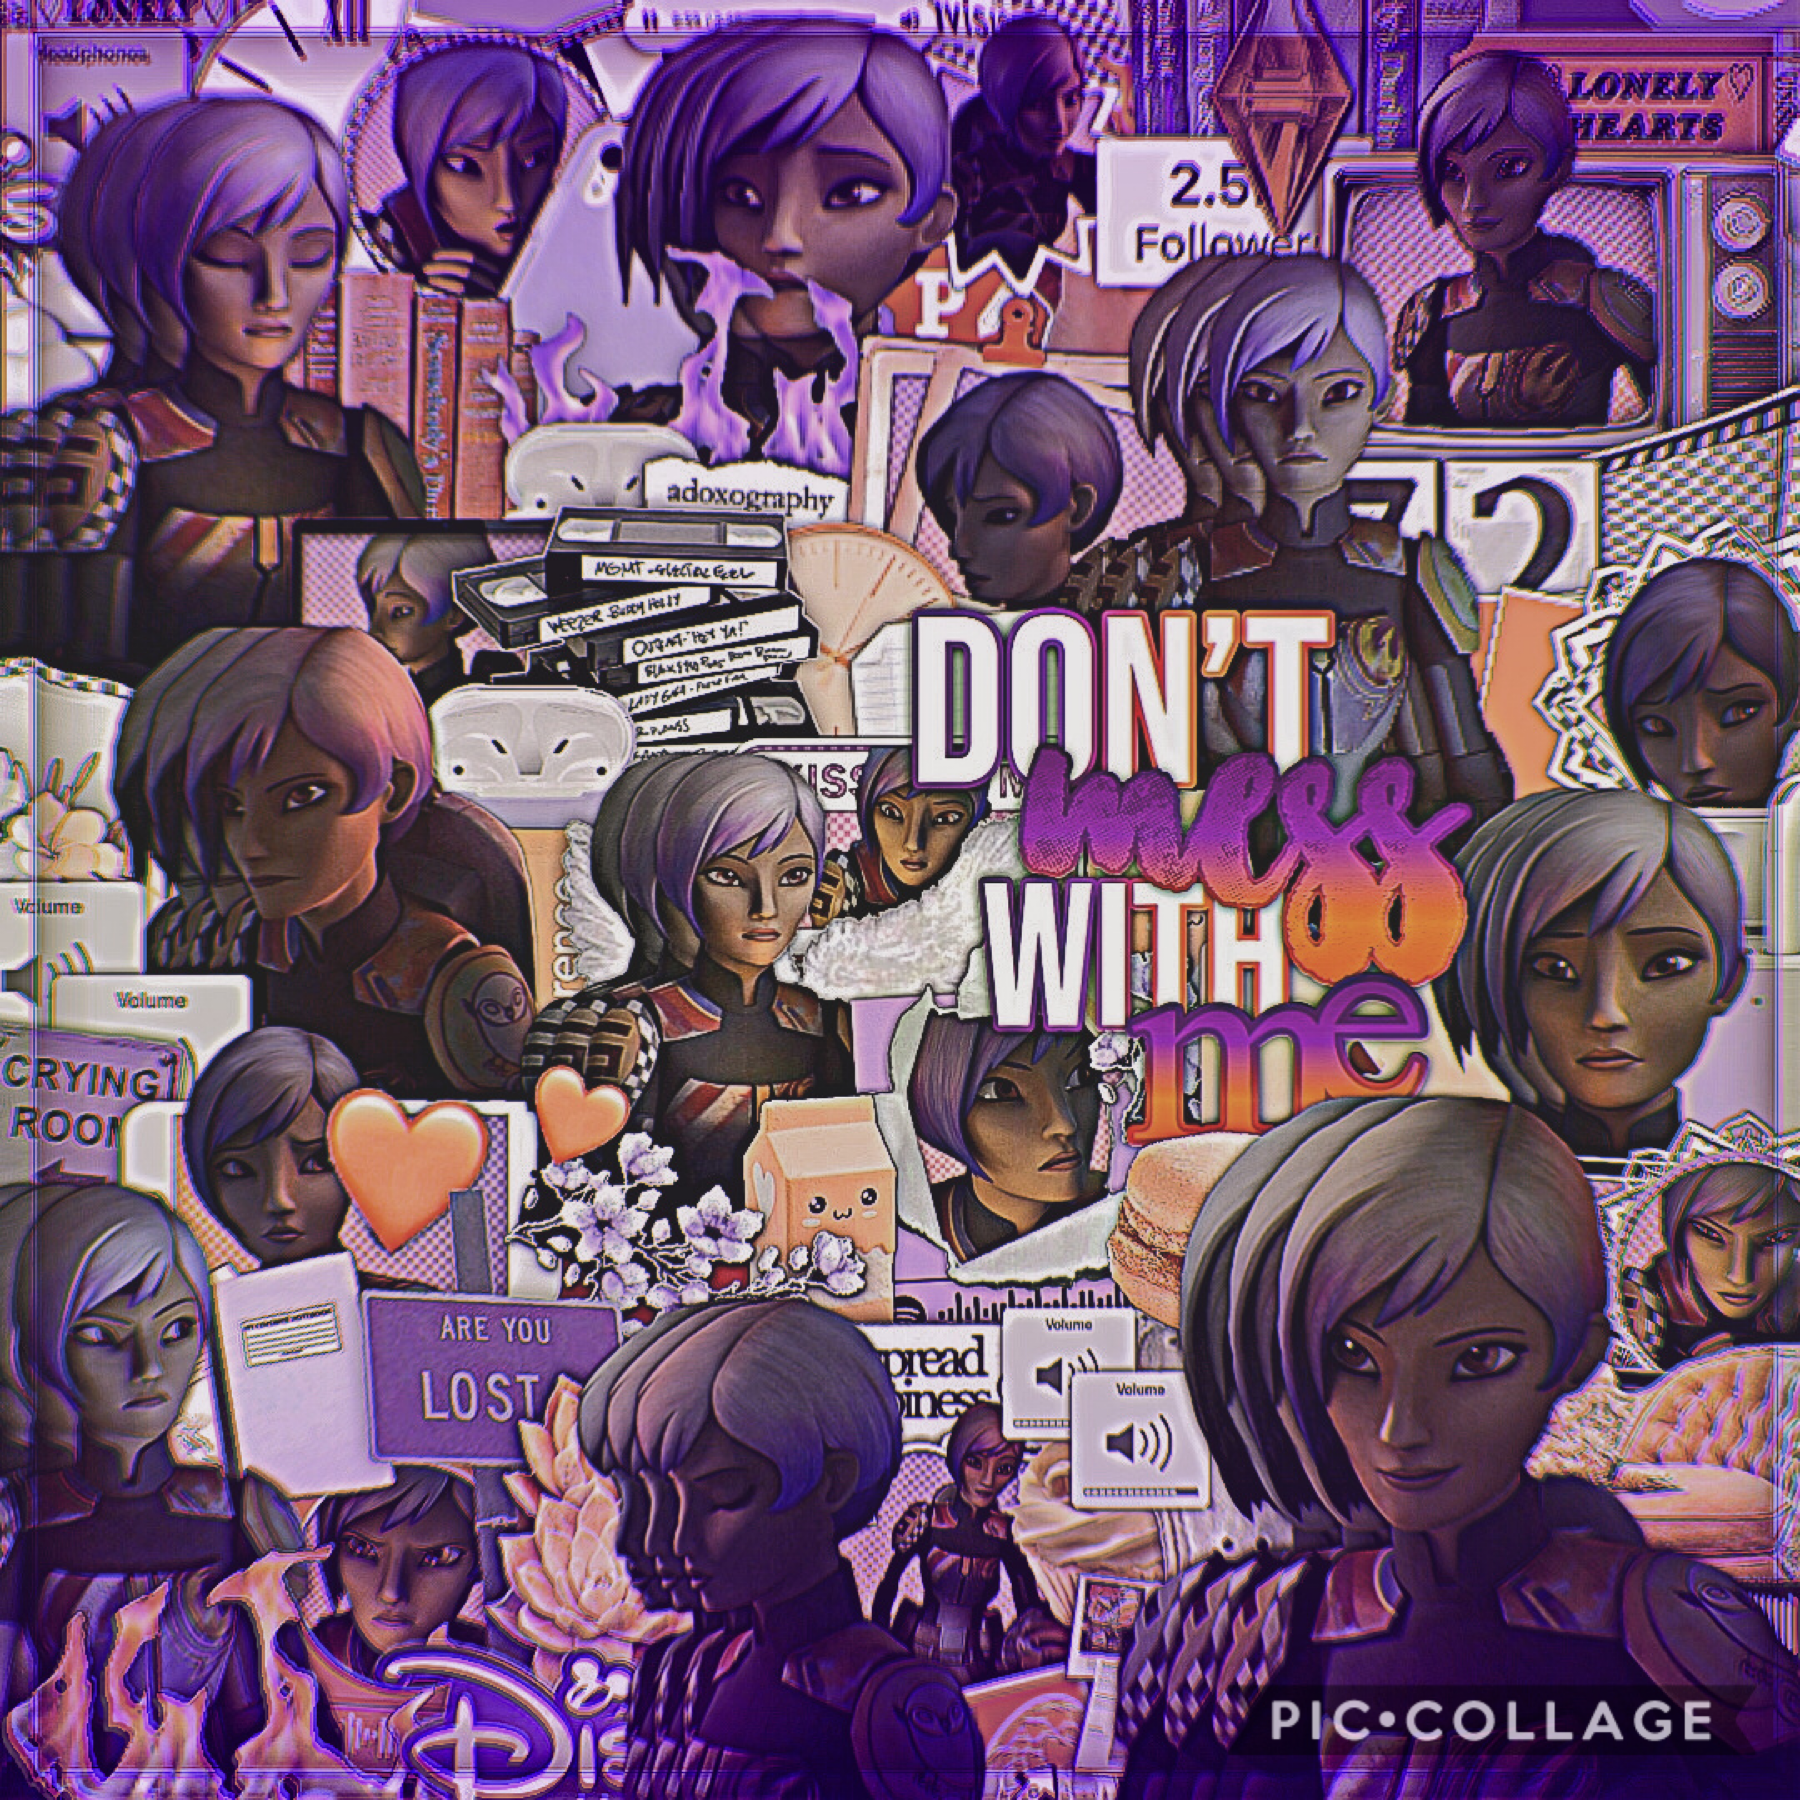 new COMPLEX edit (tap)

Info: Sabine from Star Wars Rebels


Check me out on PicsArt!

@dancingintheraine for complex edits

&

@raineyxday for outline and blend edits


—————————————————————————